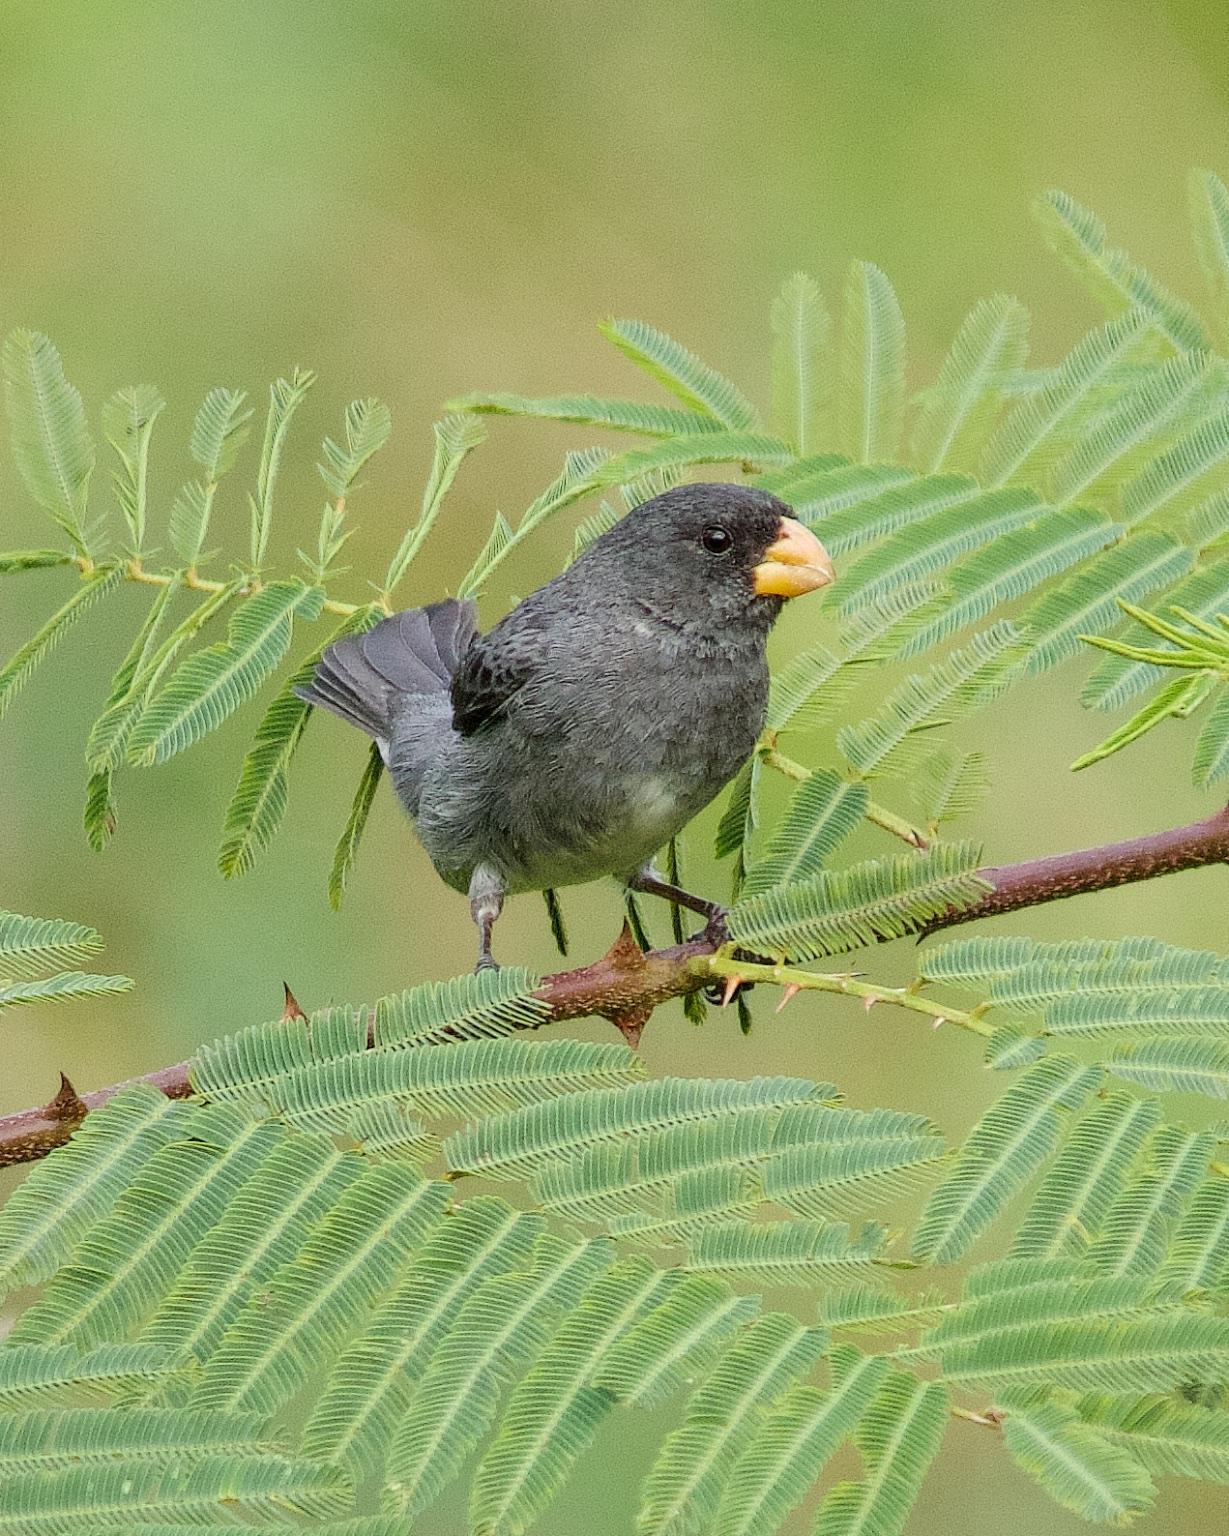 Slate-colored Seedeater Photo by Denis Rivard